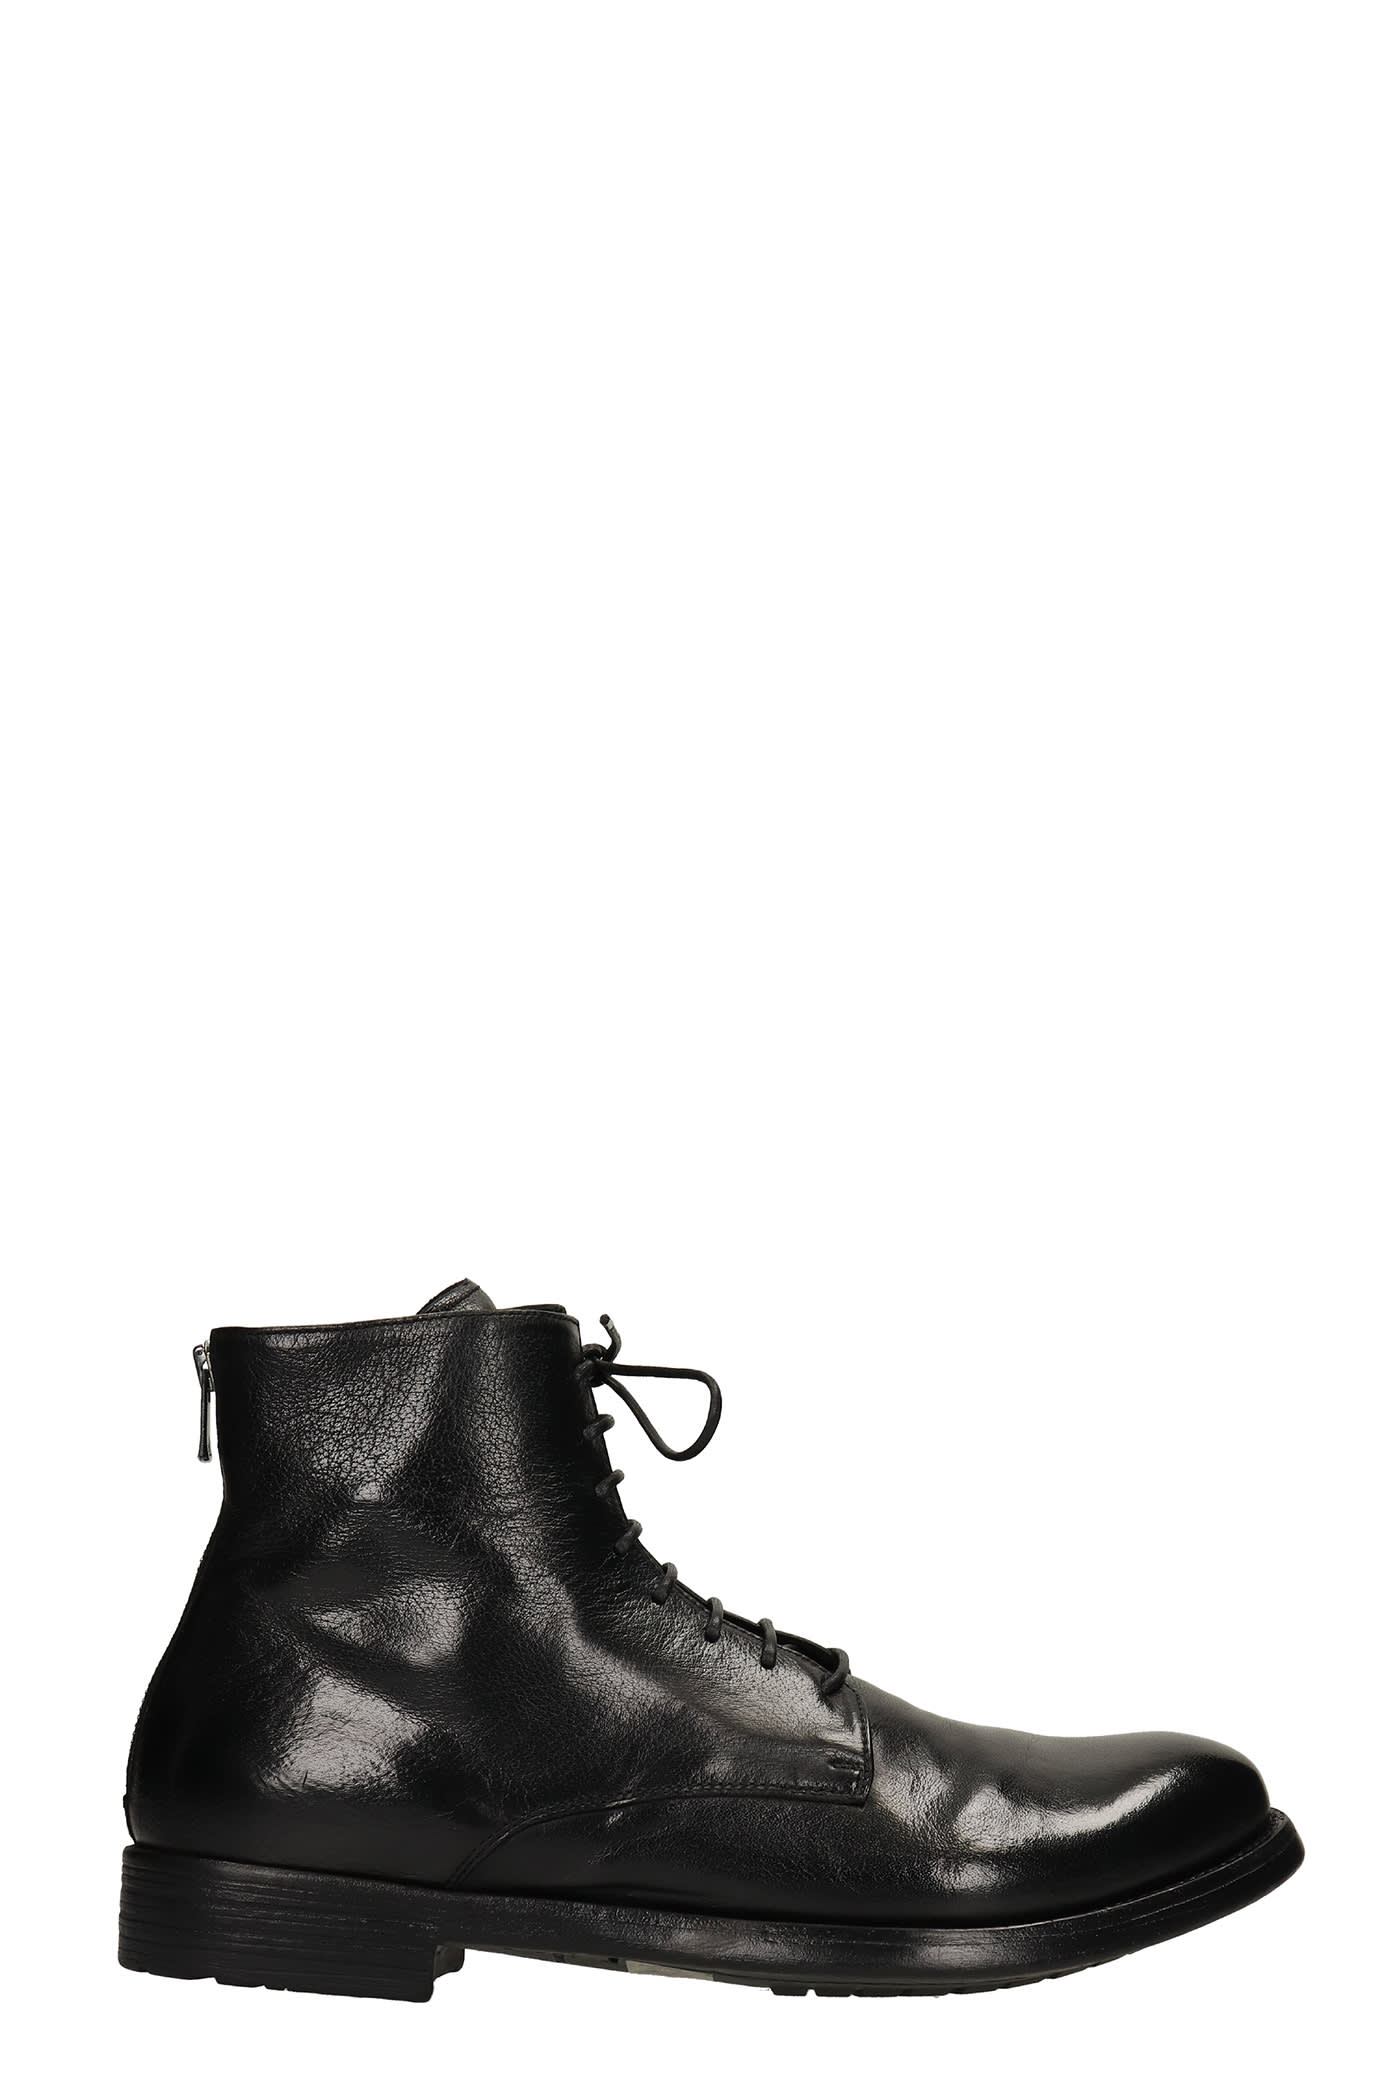 Officine Creative Hive 016 Ankle Boots In Black Leather